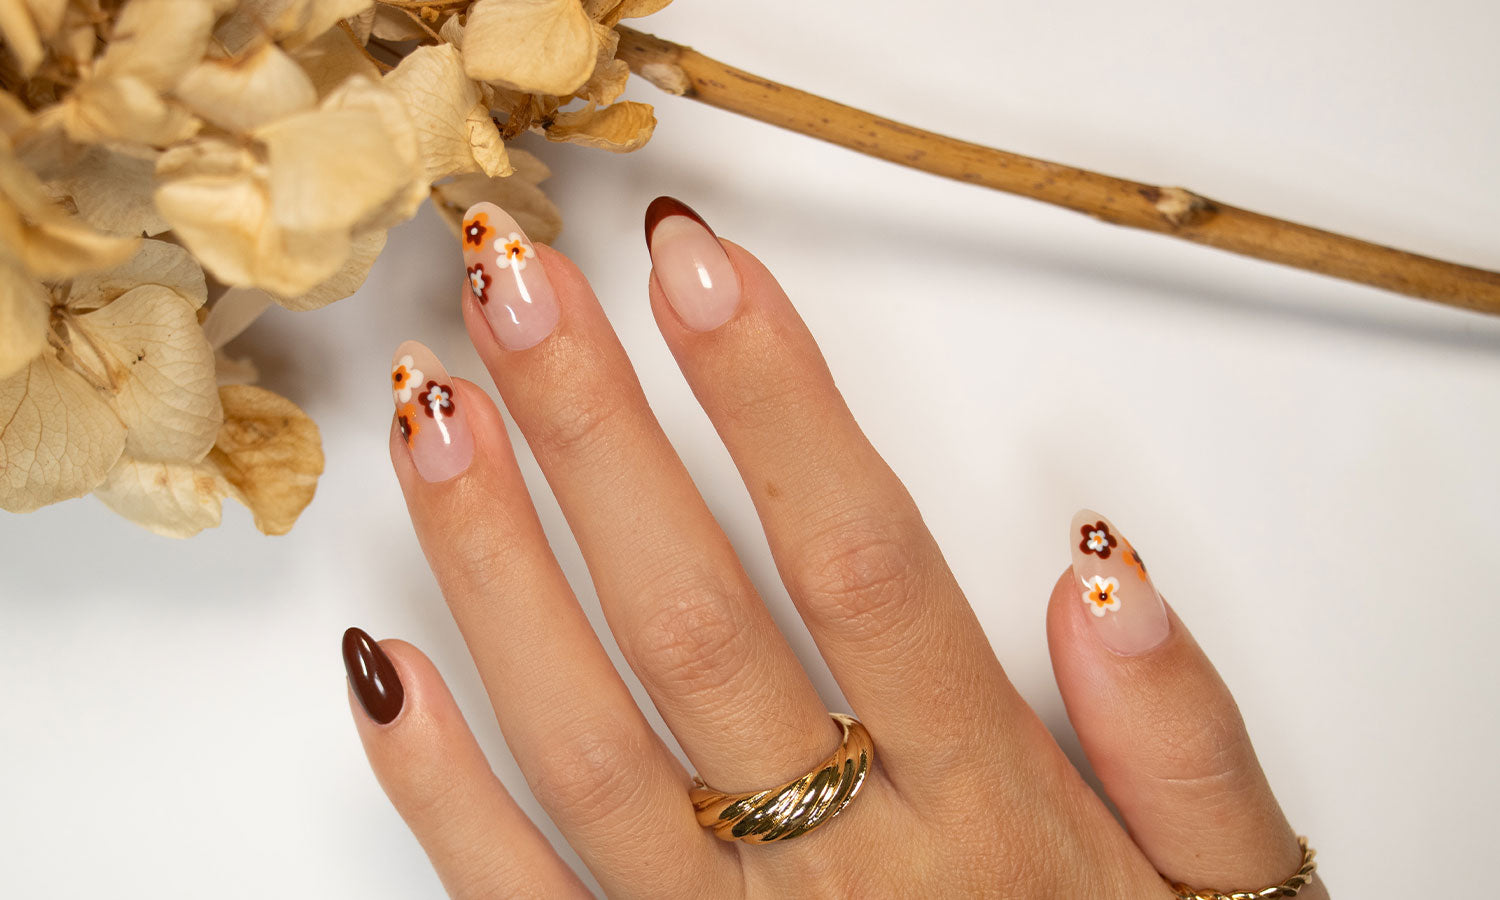 Gelous Autumn Flowers Gel Nail Art - photographed in New Zealand on model